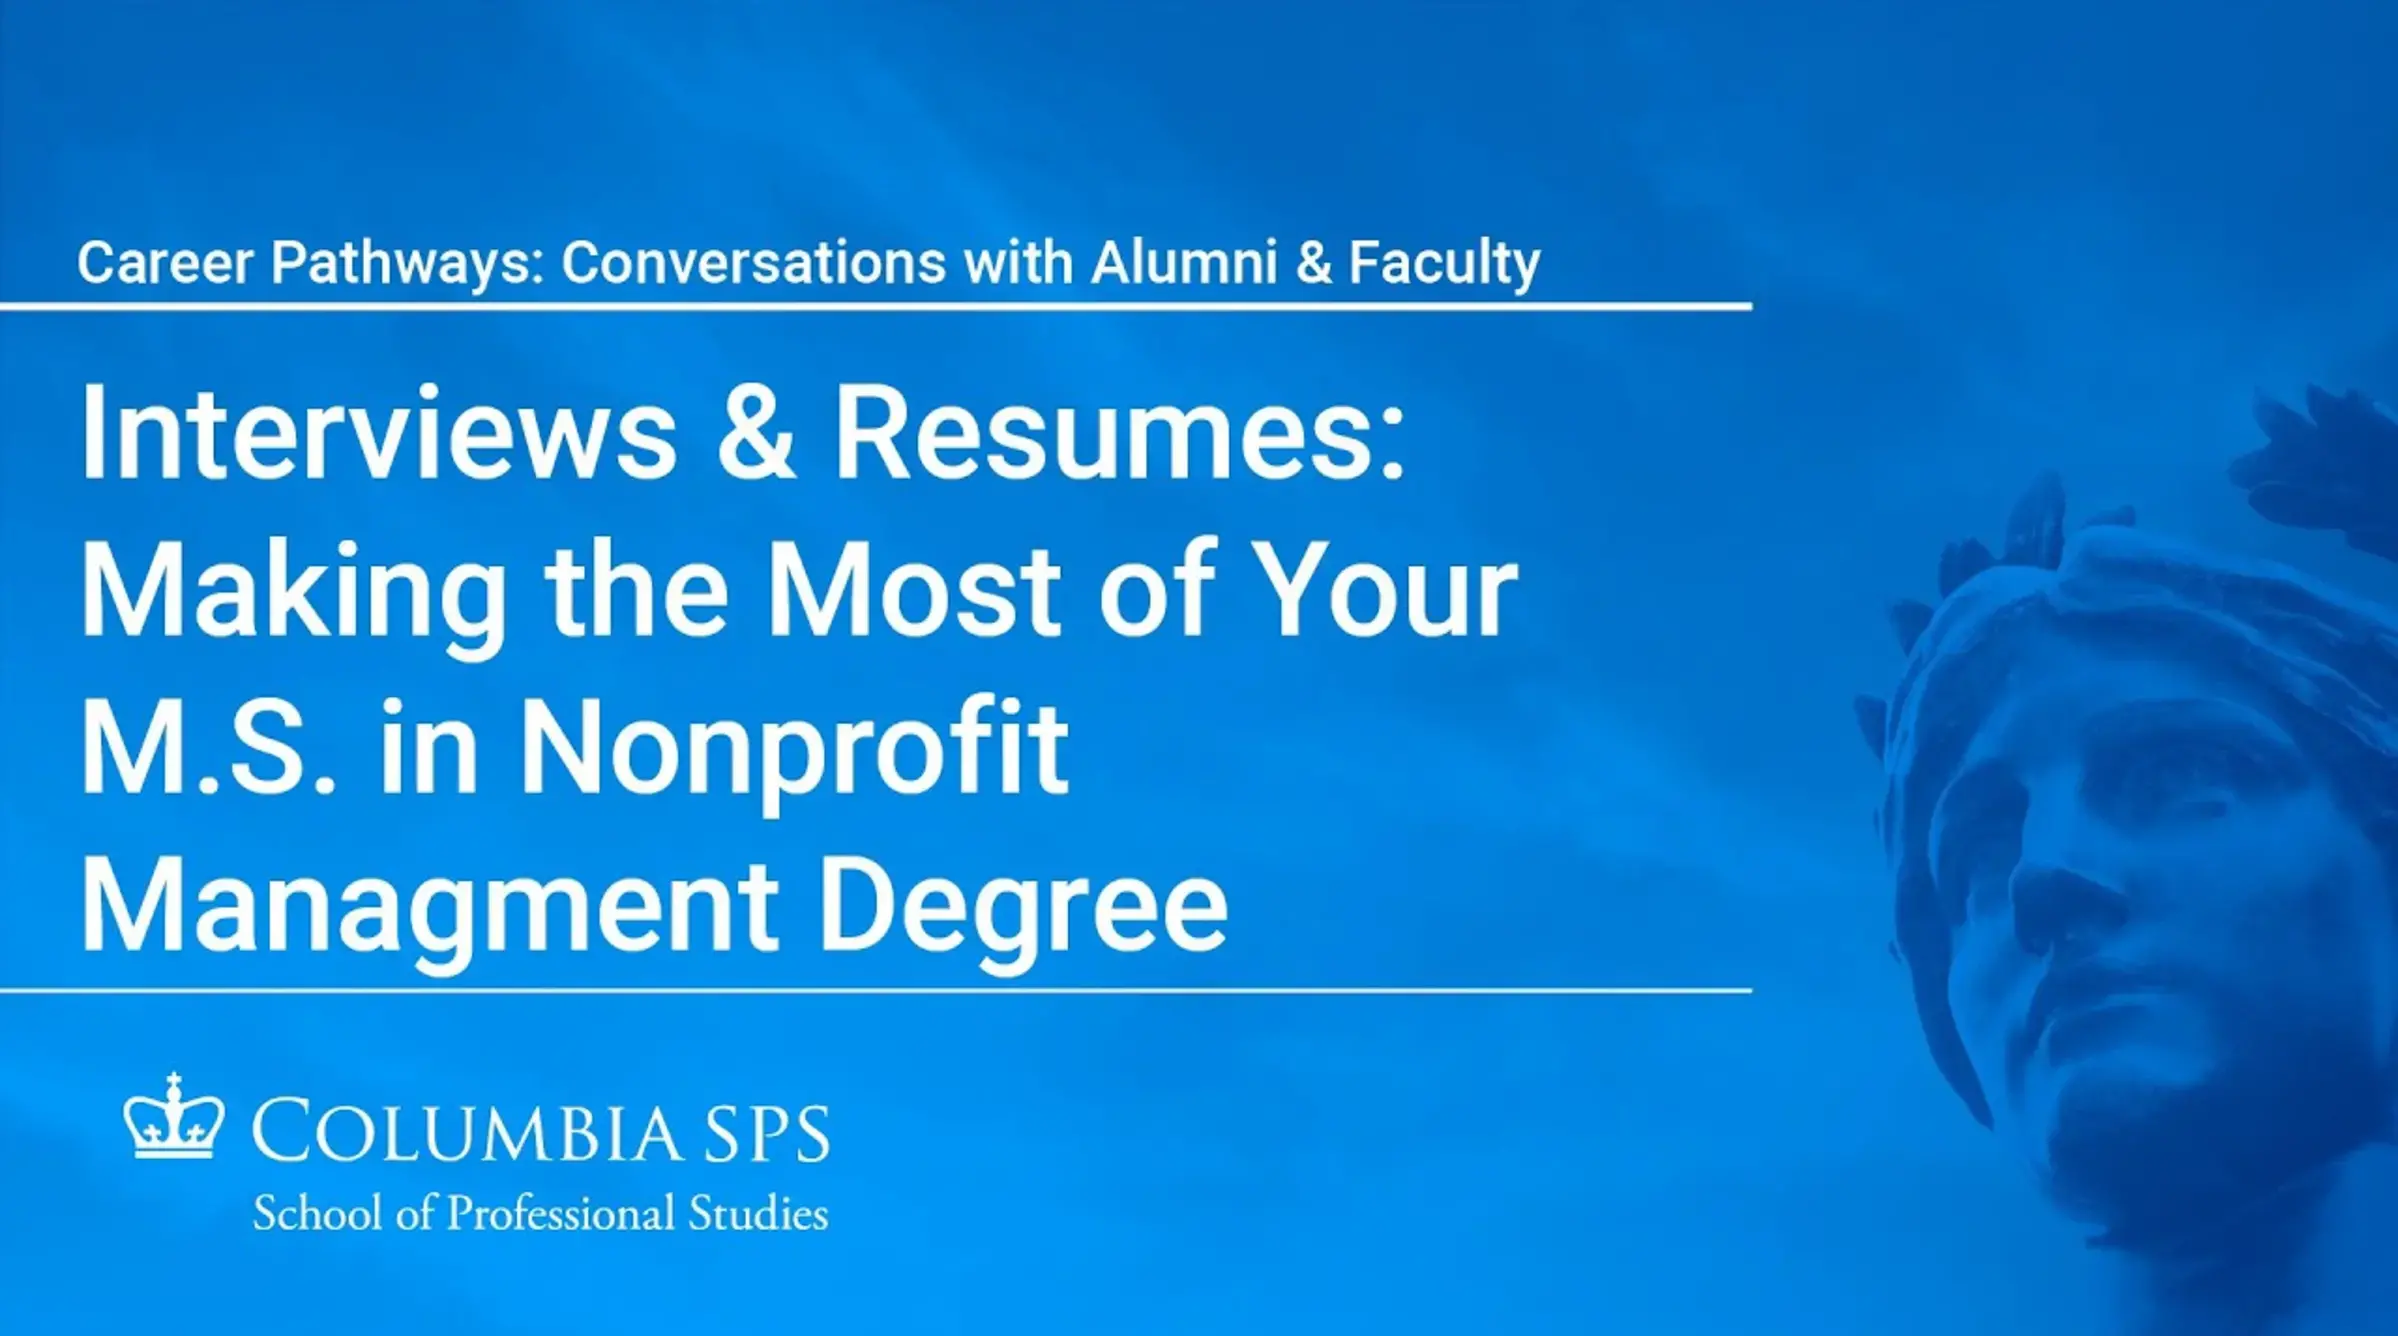 Career Pathways with Prof. Cindy Lott: Interviews and Resumes, Making the Most of your M.S. in Nonprofit Management Degree for Career Advancement